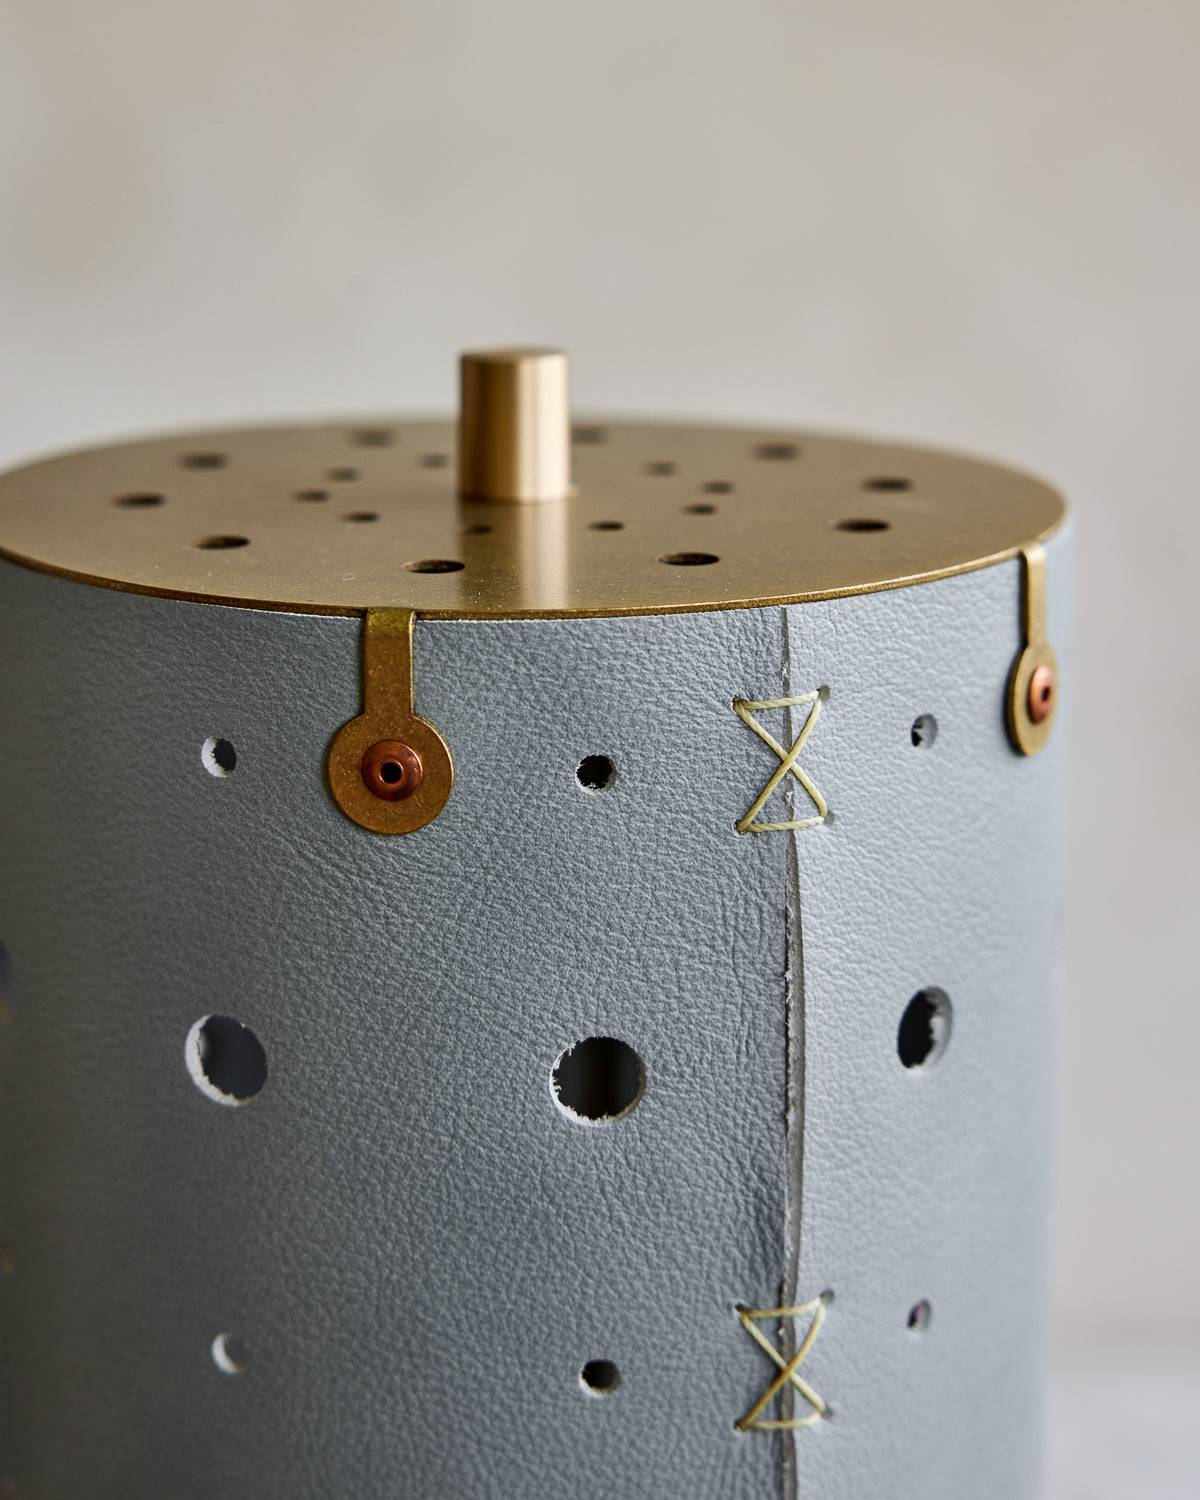 Charming accent lamp with blue handstitched leather shade, warm brass and walnut wood